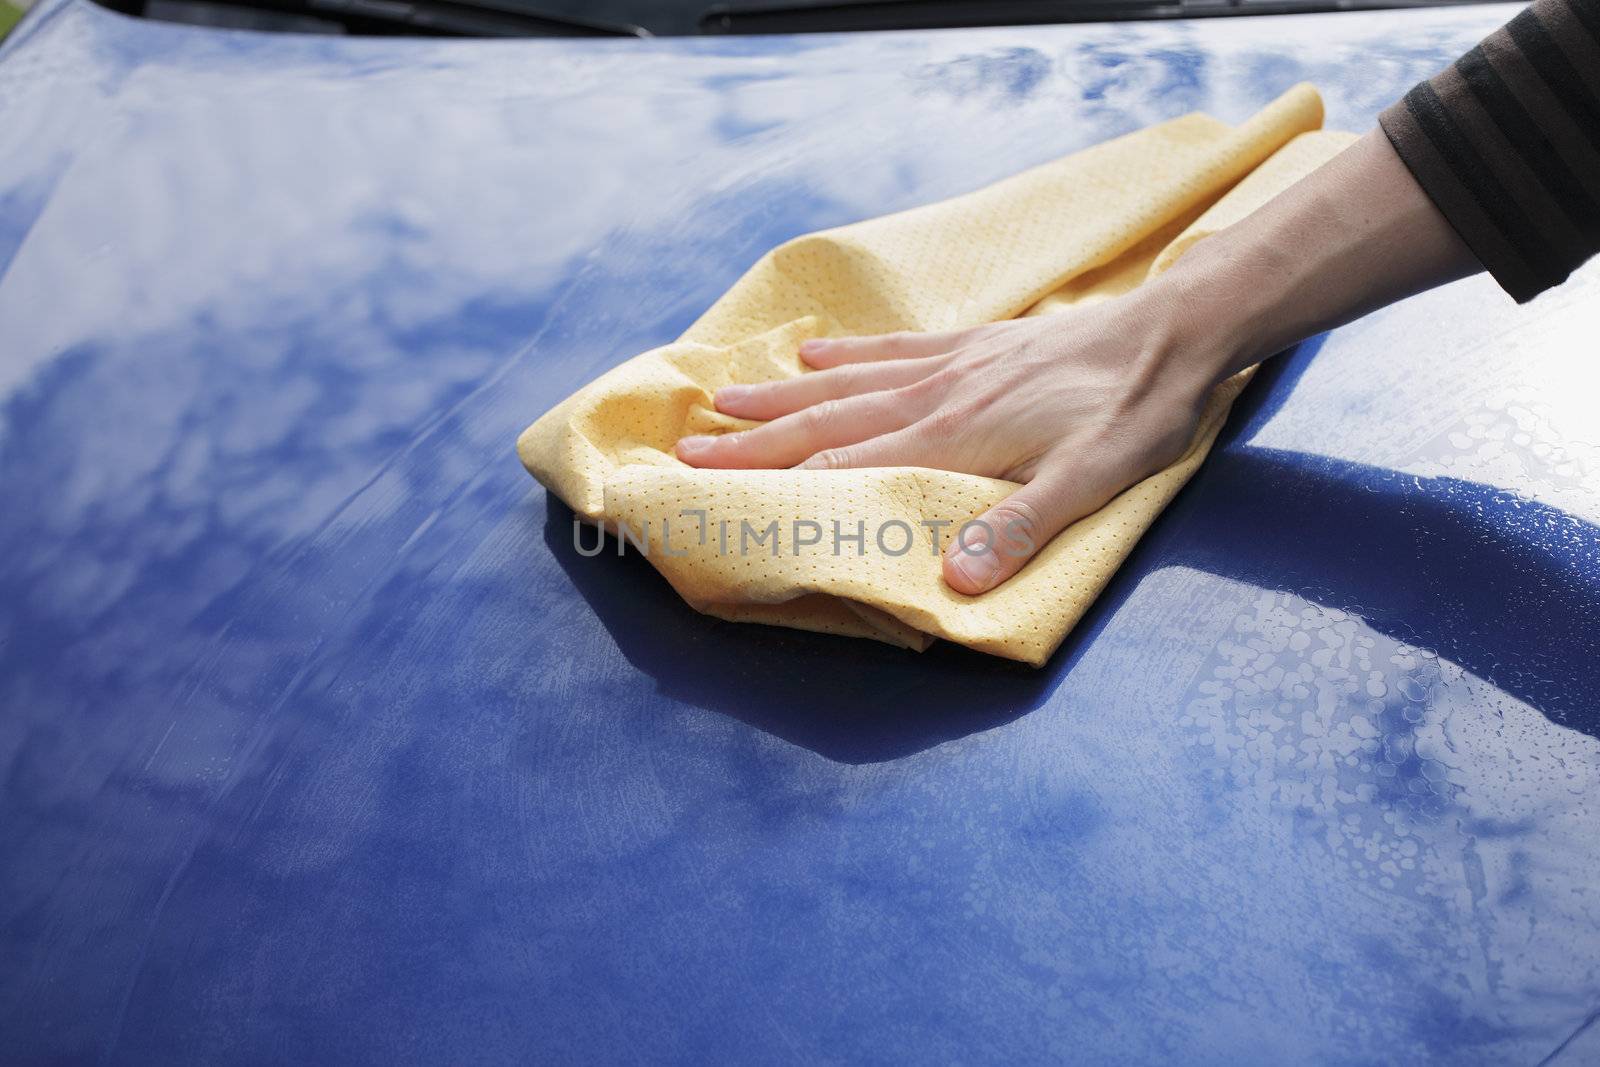 A Hand drying a blue car with a synthetic chamois leather.